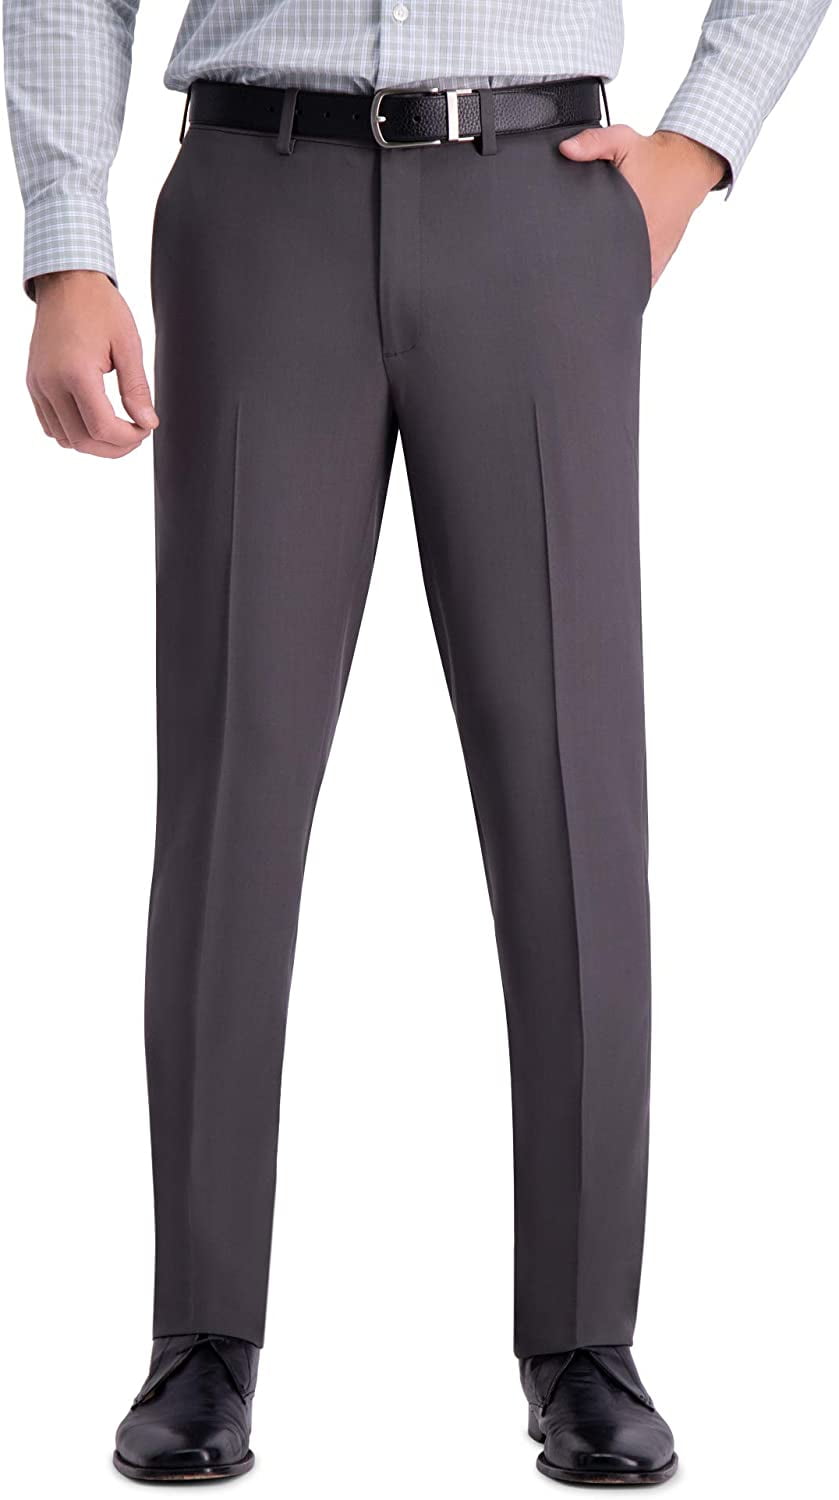 Chocolate Men's Straight Fit Performance Pant New Haggar H26 